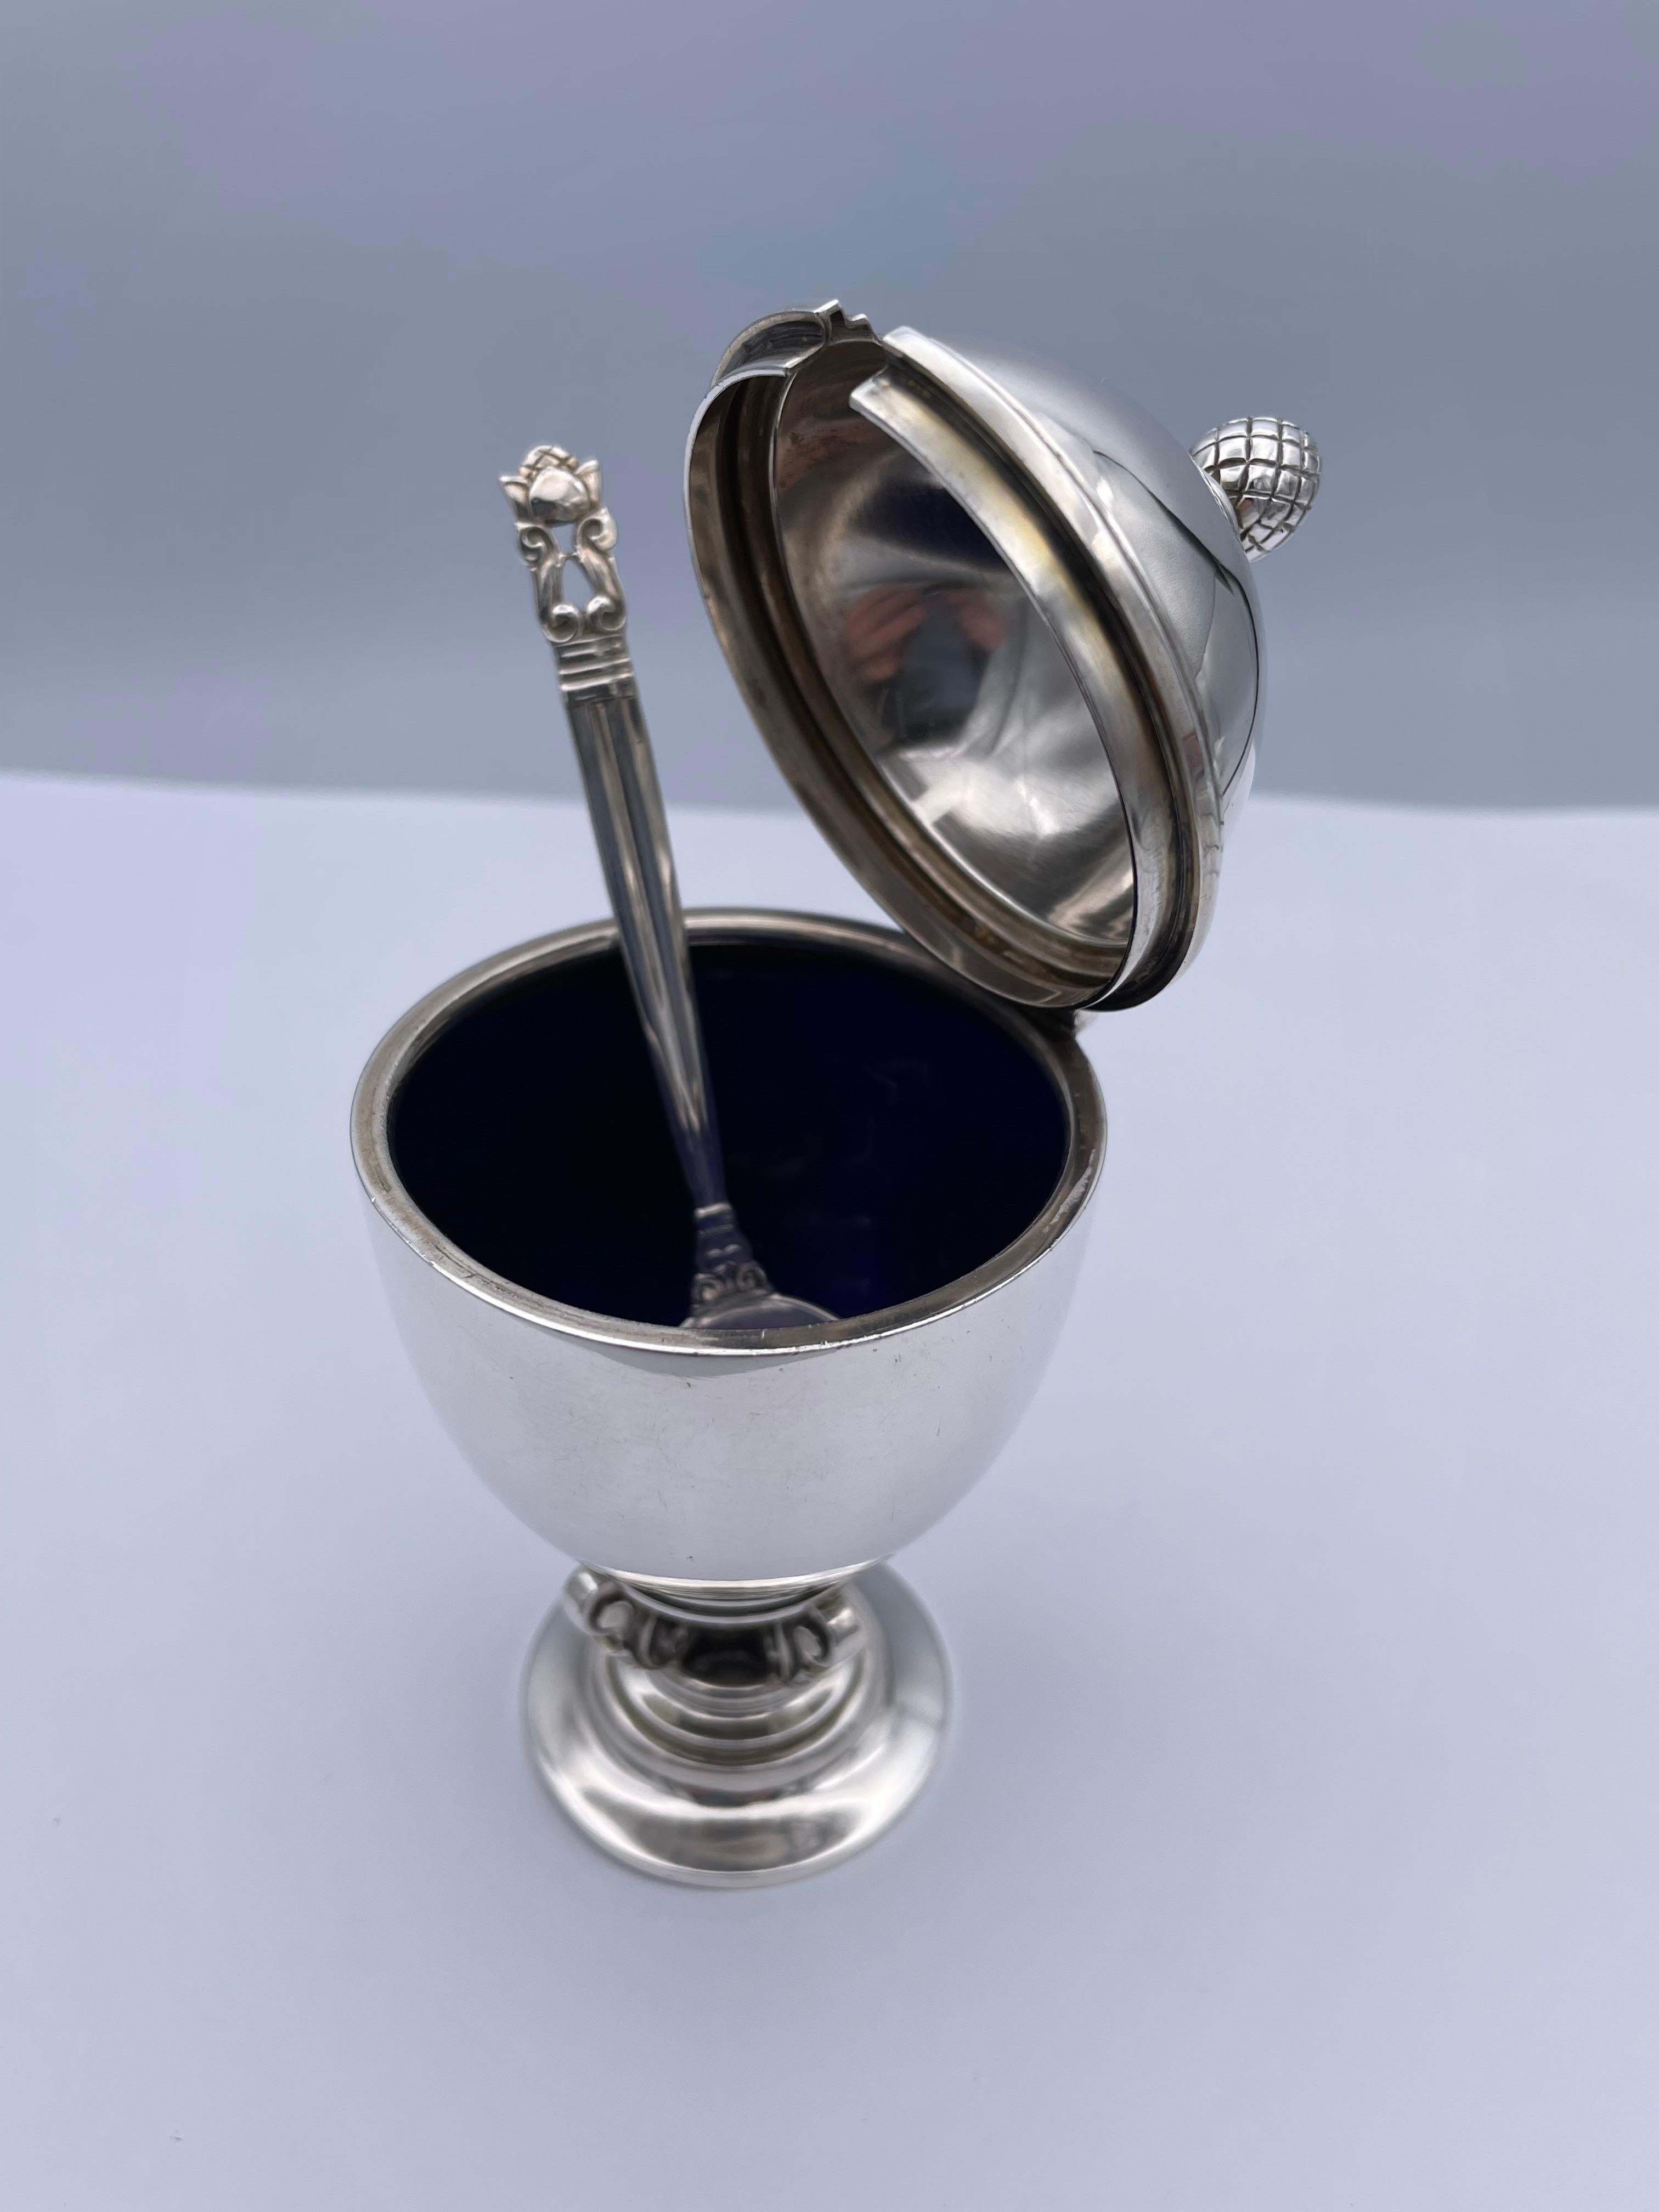 Acorn pattern hinged mustard pot with spoon.  Made by GEORG JENSN.  Sterling silver, with original cobalt glass liner.  4 1/2